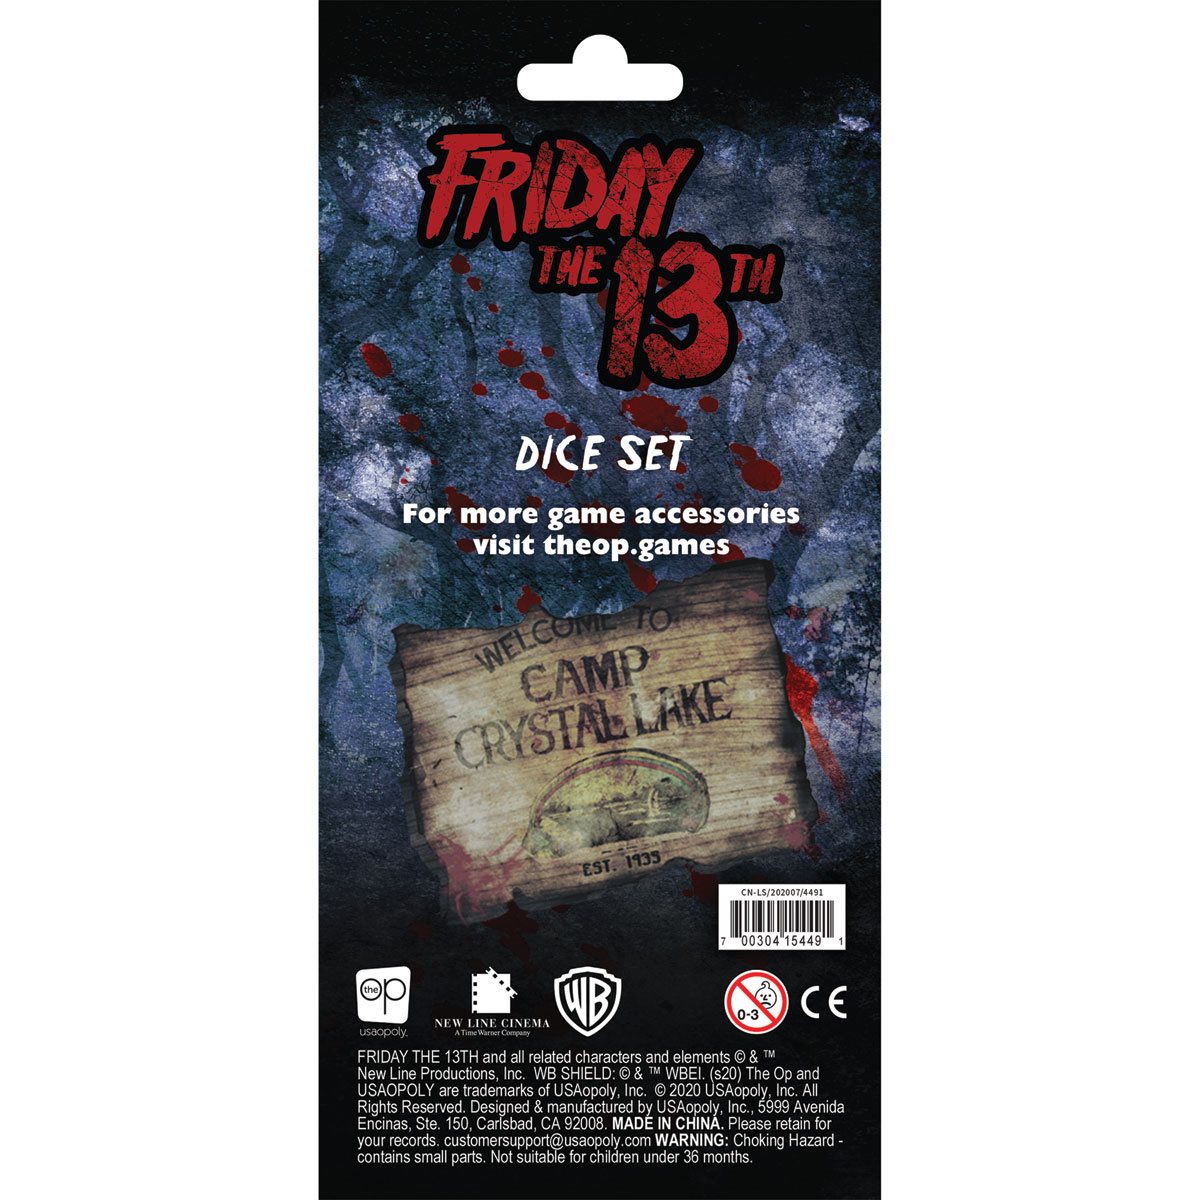 Friday the 13th Horror at Camp Crystal Lake Board Game USAopoly